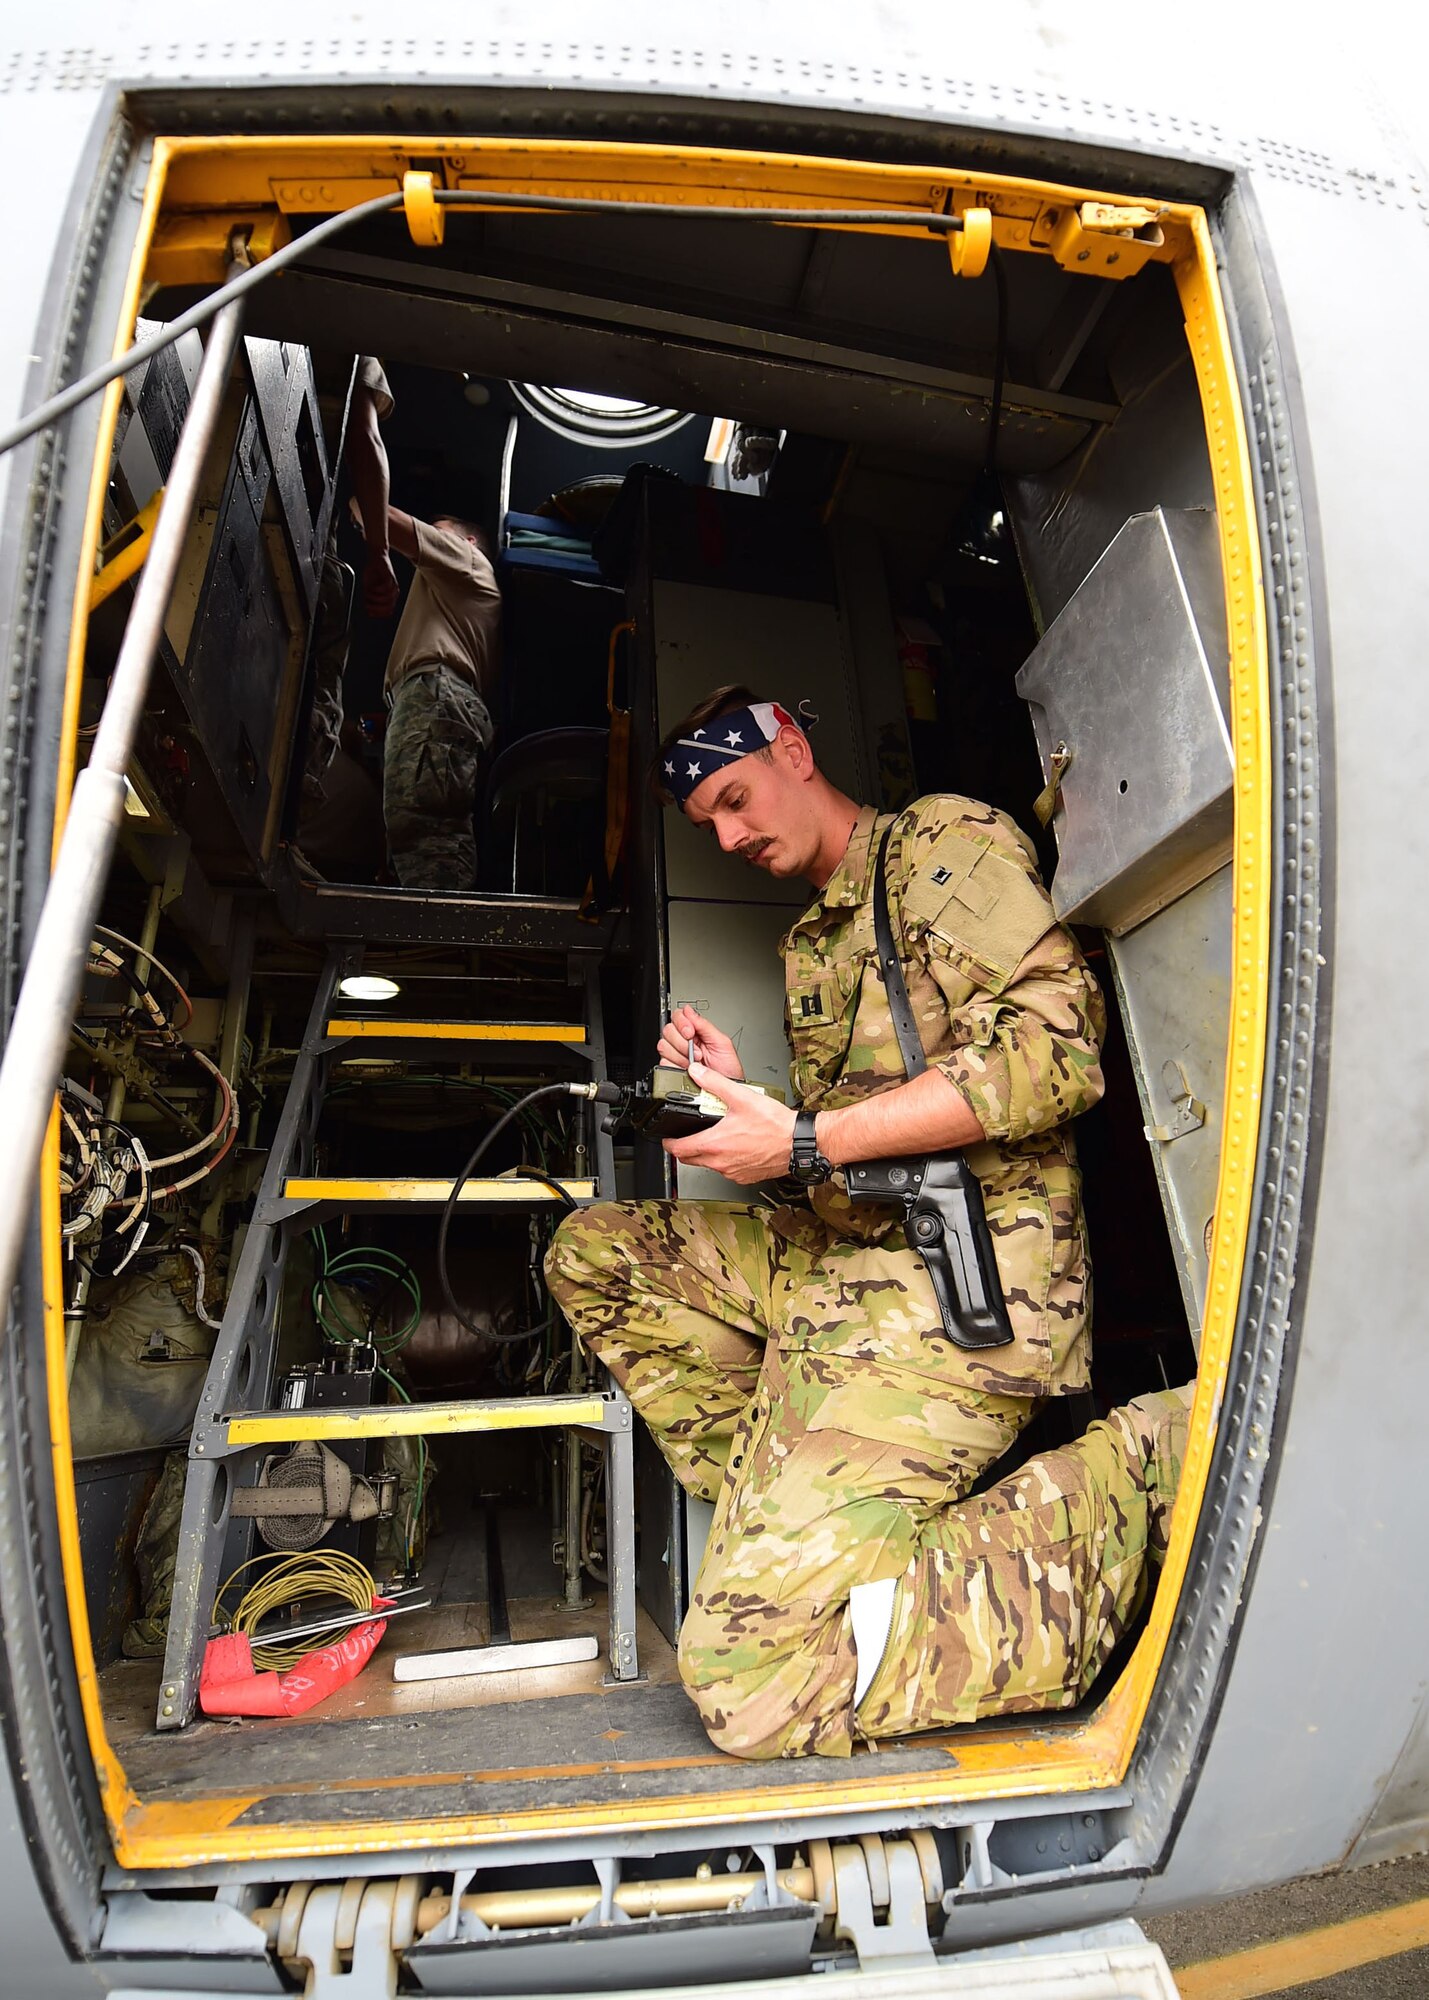 Capt. Drew Grotbo, 737th Expeditionary Airlift Squadron C-130H Hercules co-pilot, conducts pre-flight checks at an undisclosed location in Southwest Asia, Oct. 27, 2015. The mission of the 737th EAS is to provide airlift, airdrop and reconnaissance support for Operation INHERENT RESOLVE. (U.S. Air Force photo by Staff Sgt. Jerilyn Quintanilla)